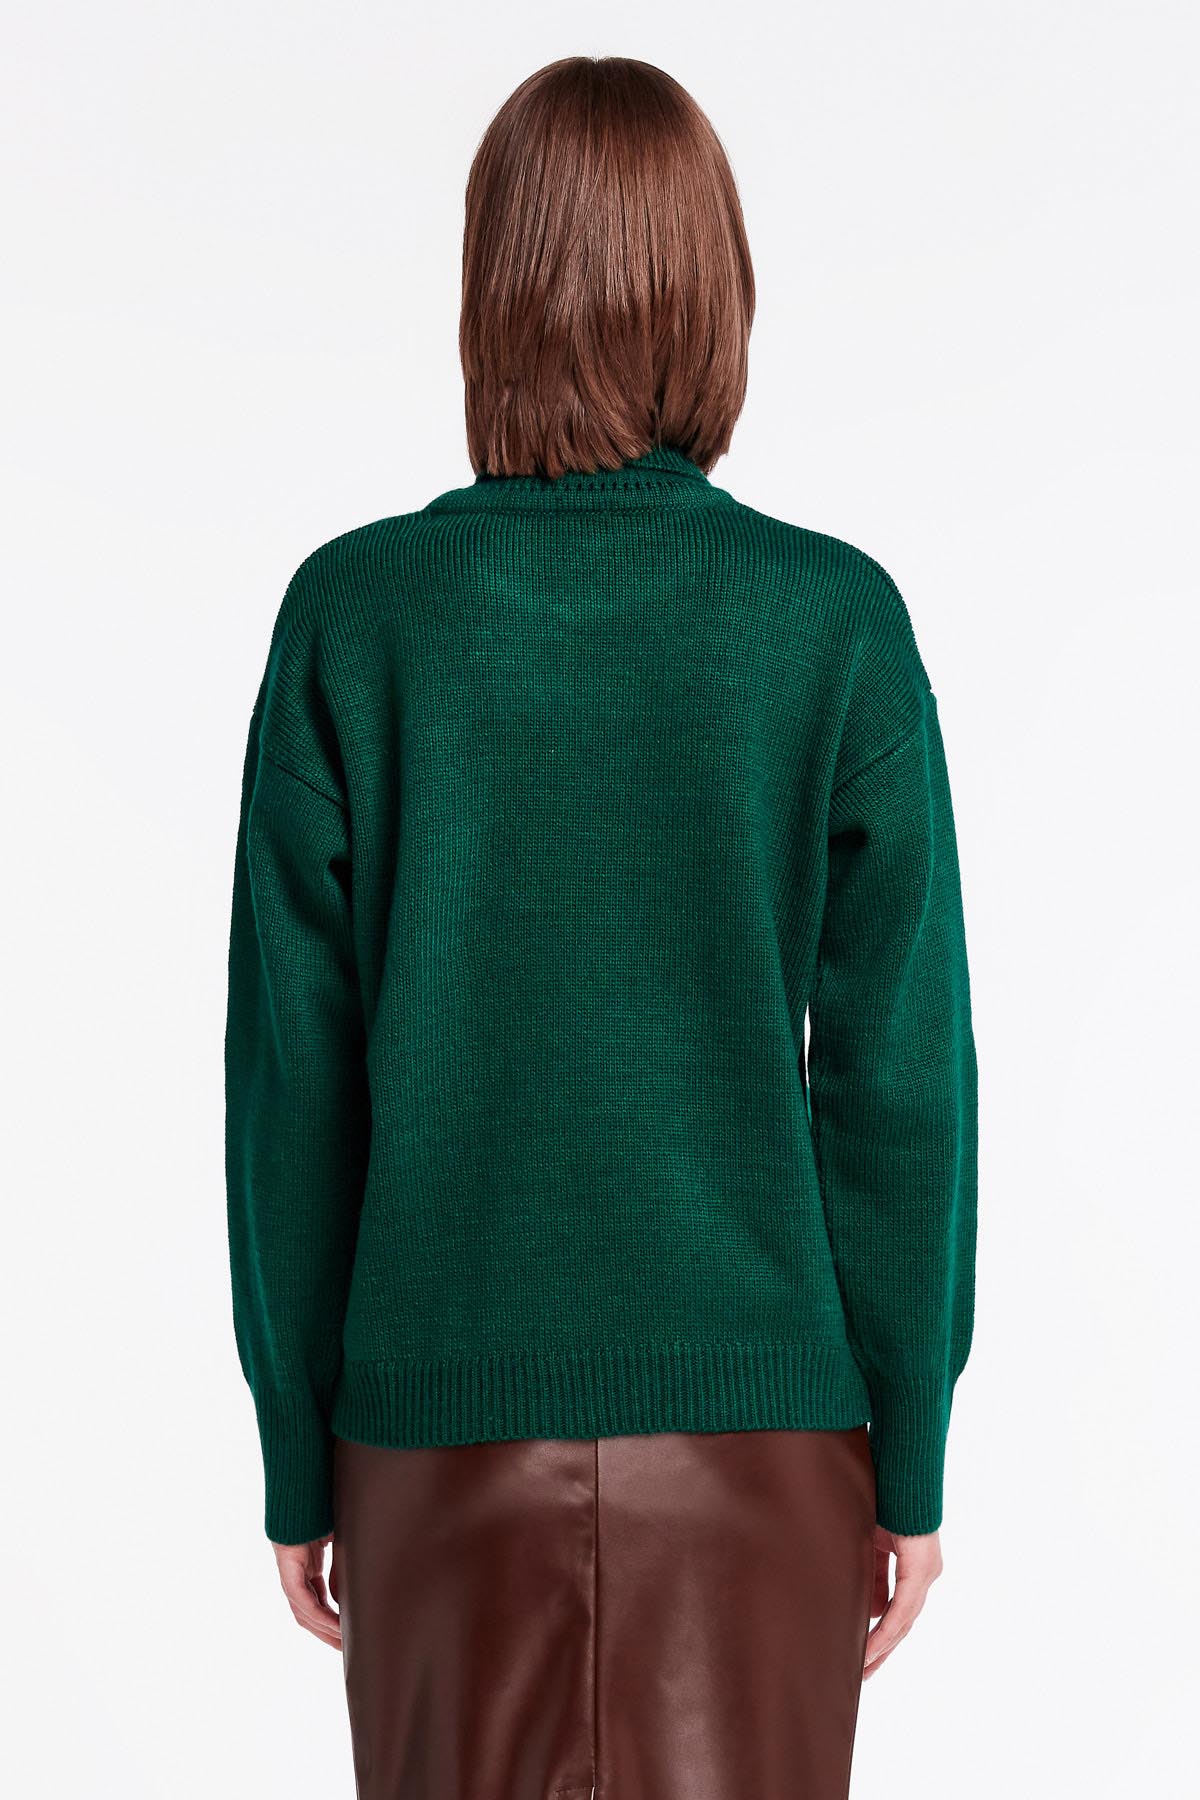 Green knit polo neck sweater, photo 4